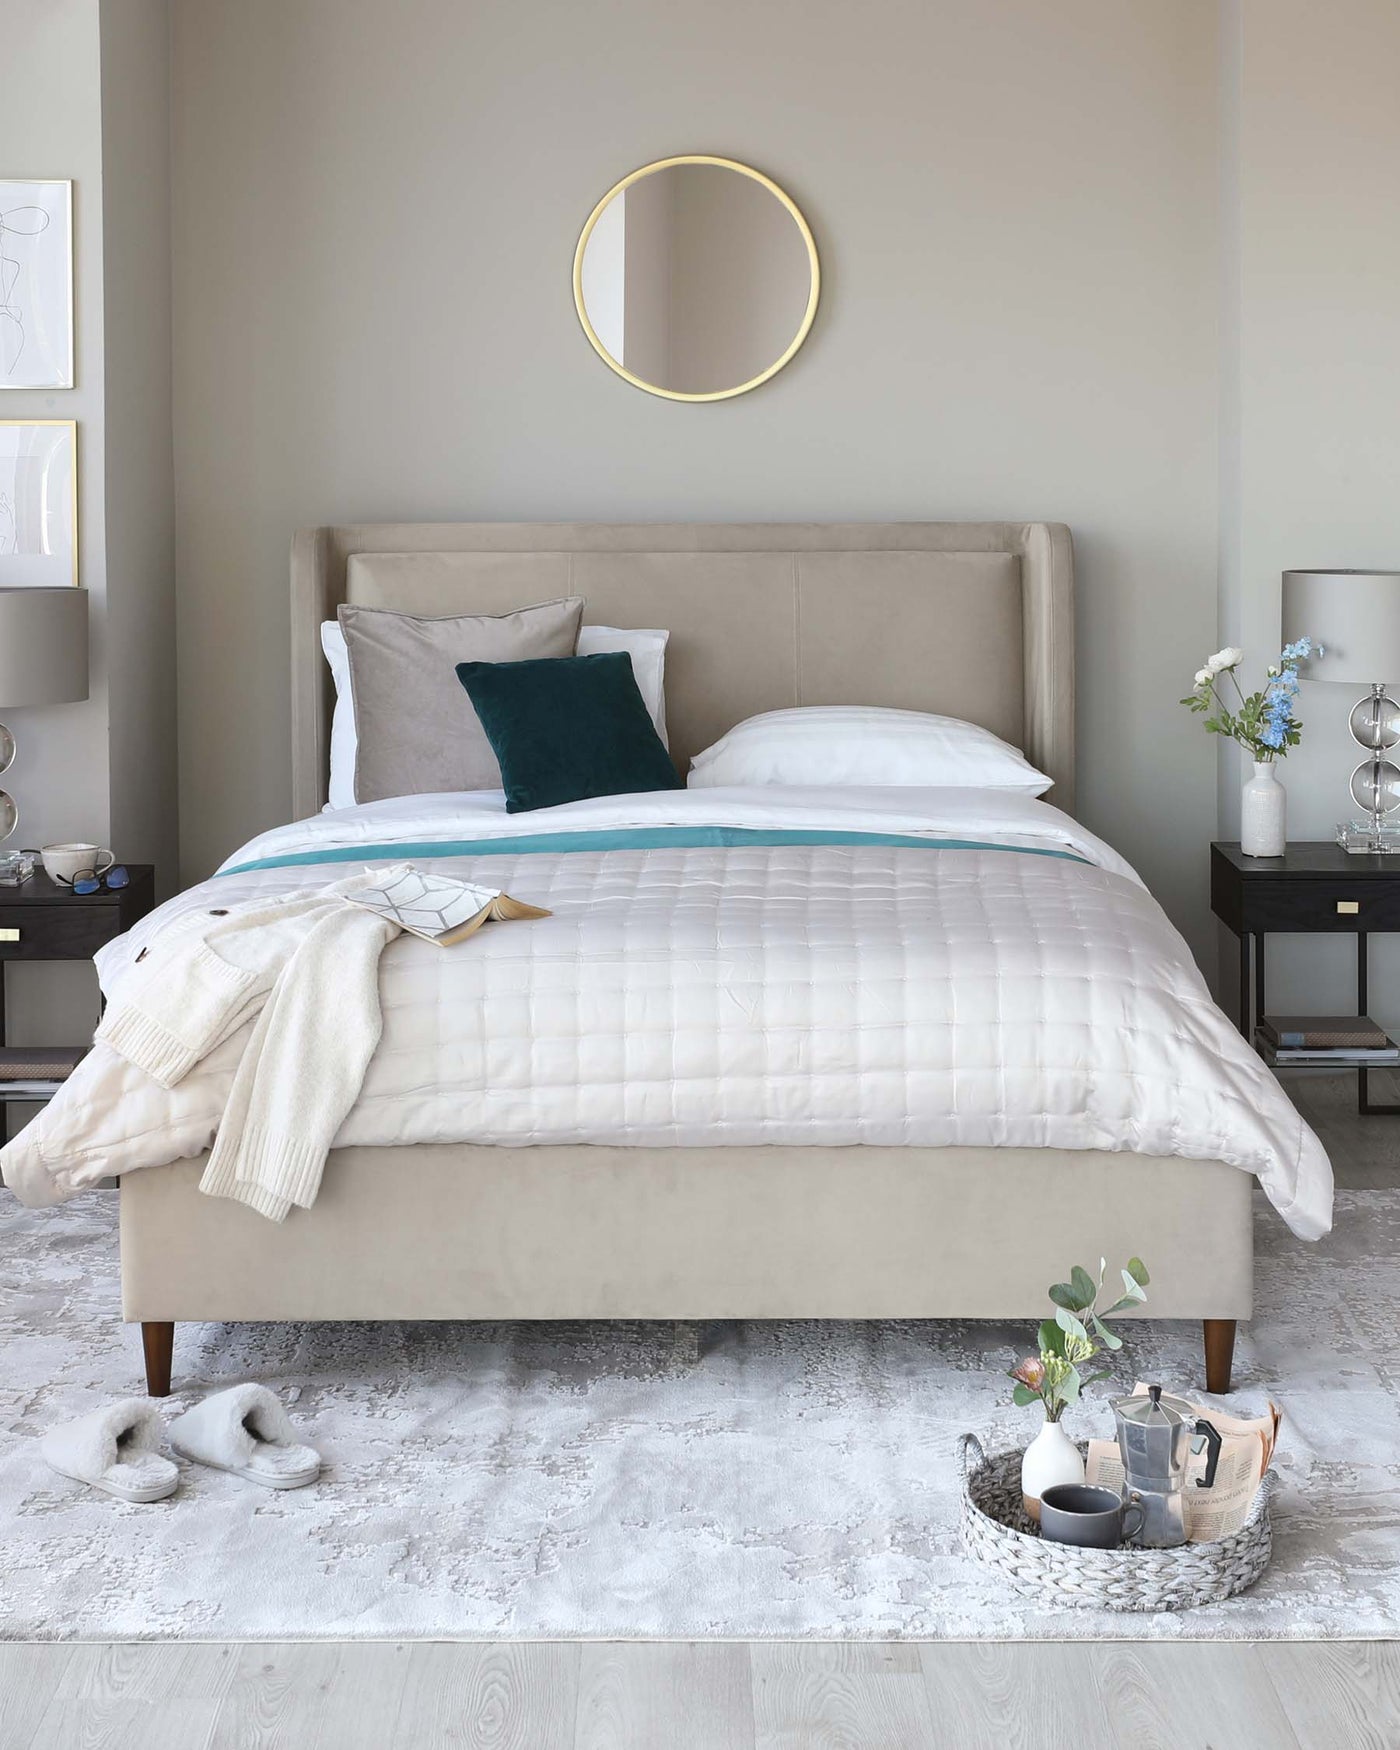 Elegant contemporary bedroom featuring a beige upholstered bed with a tufted headboard, complemented by crisp white bedding and a teal accent pillow. Beside the bed is a modern black nightstand with a sleek silver lamp. An area rug with a faded pattern adds a layer of texture to the room, and a round mirror with a thin gold frame hangs above the bed, enhancing the space's sophistication. A tray with a plant and home decor items is placed casually on the floor, adding a touch of coziness.